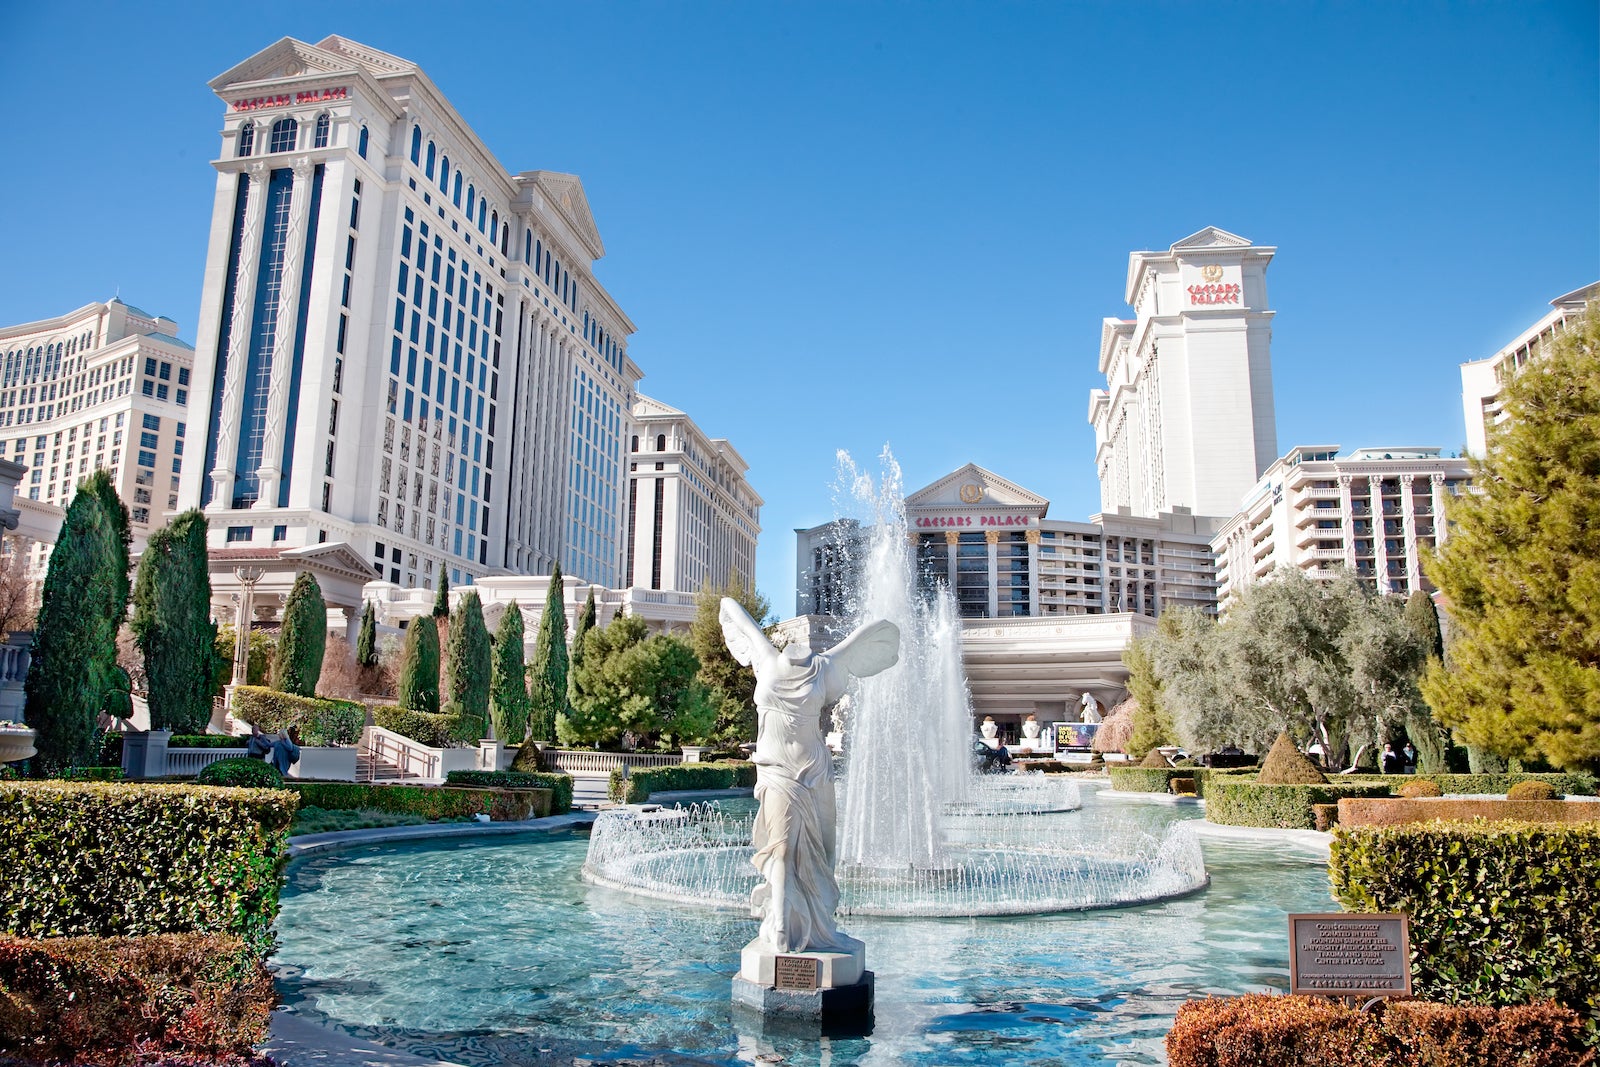 view of round fountain with angel statue in front of large Roman-style hotel towers